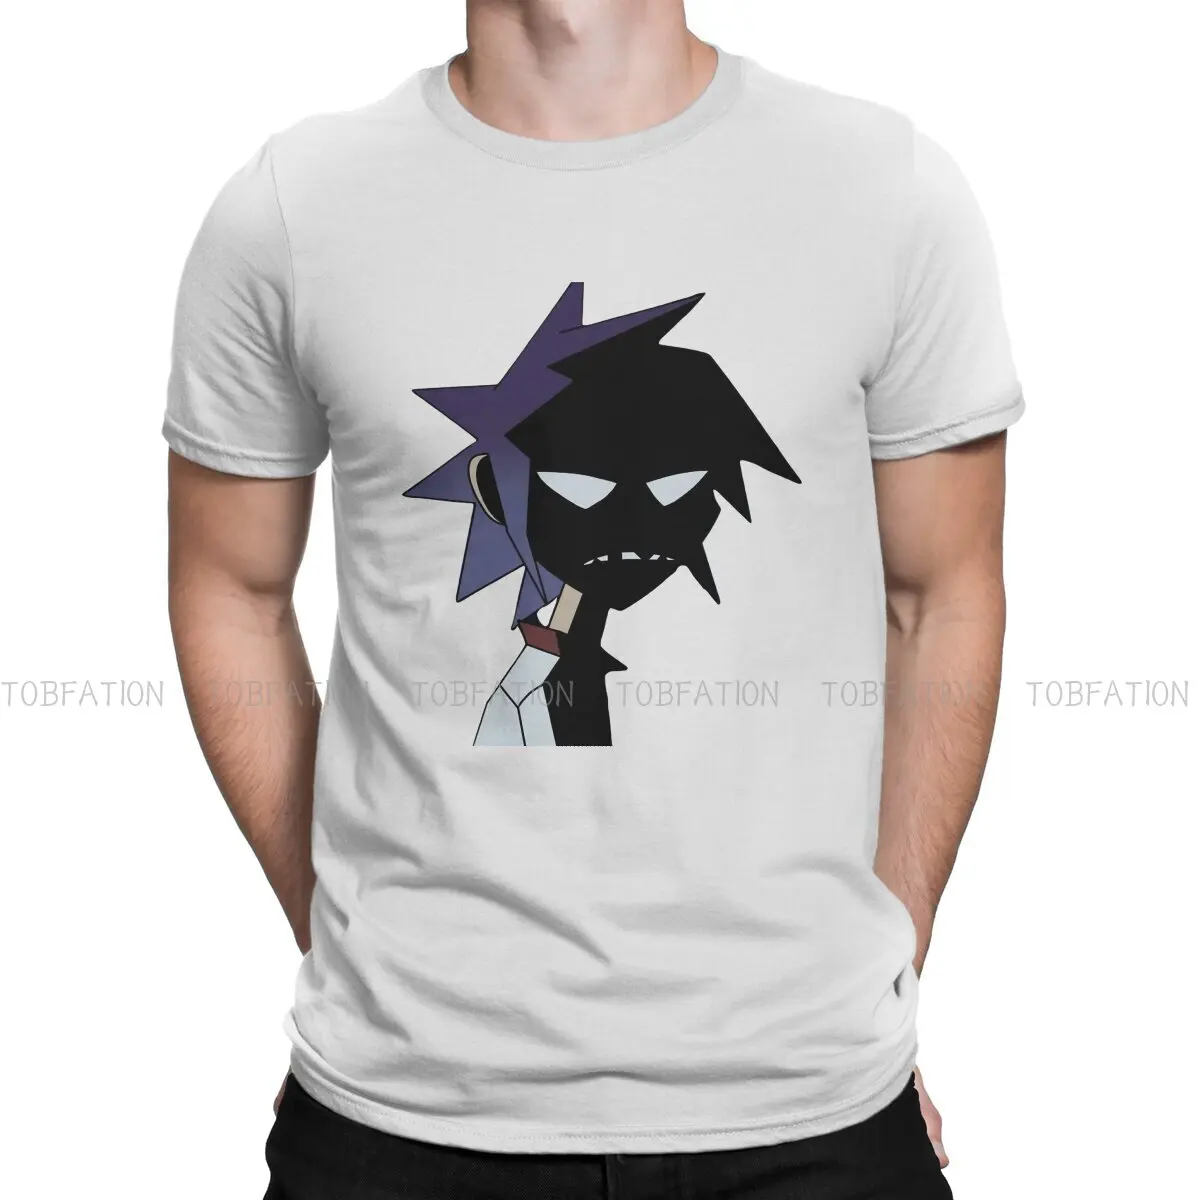 

Angry Face Graphic TShirt Gorillaz Virtual Band Creative Streetwear Comfortable T Shirt Male Tee Unique Gift Idea